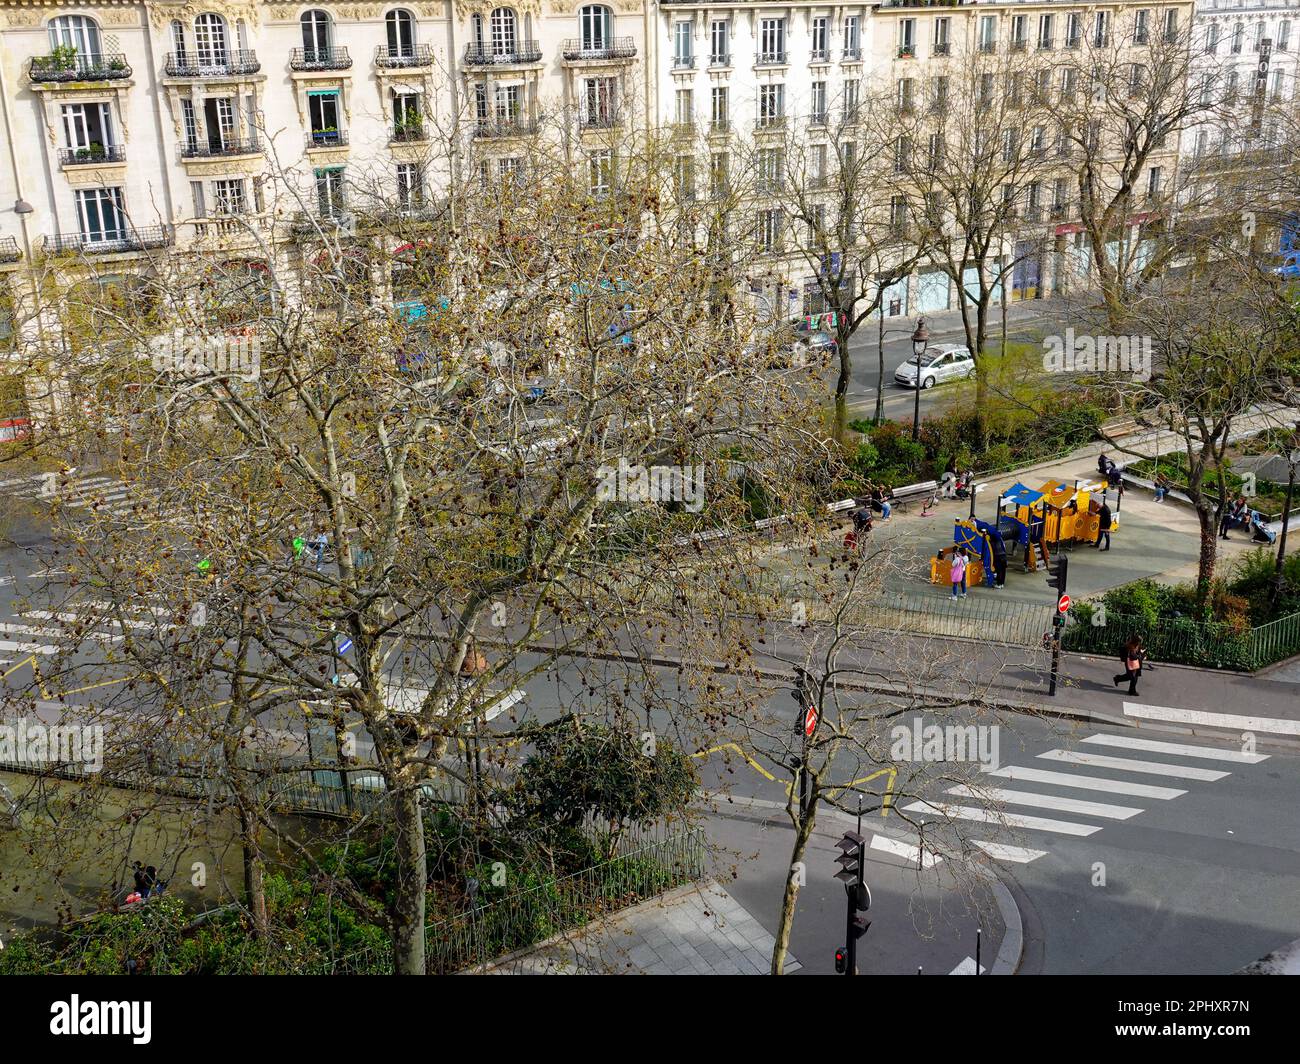 Children being watched by parents, carers, as they play on a city playground. Every day life on Bd Richard-Lenoir, Paris, France. Stock Photo